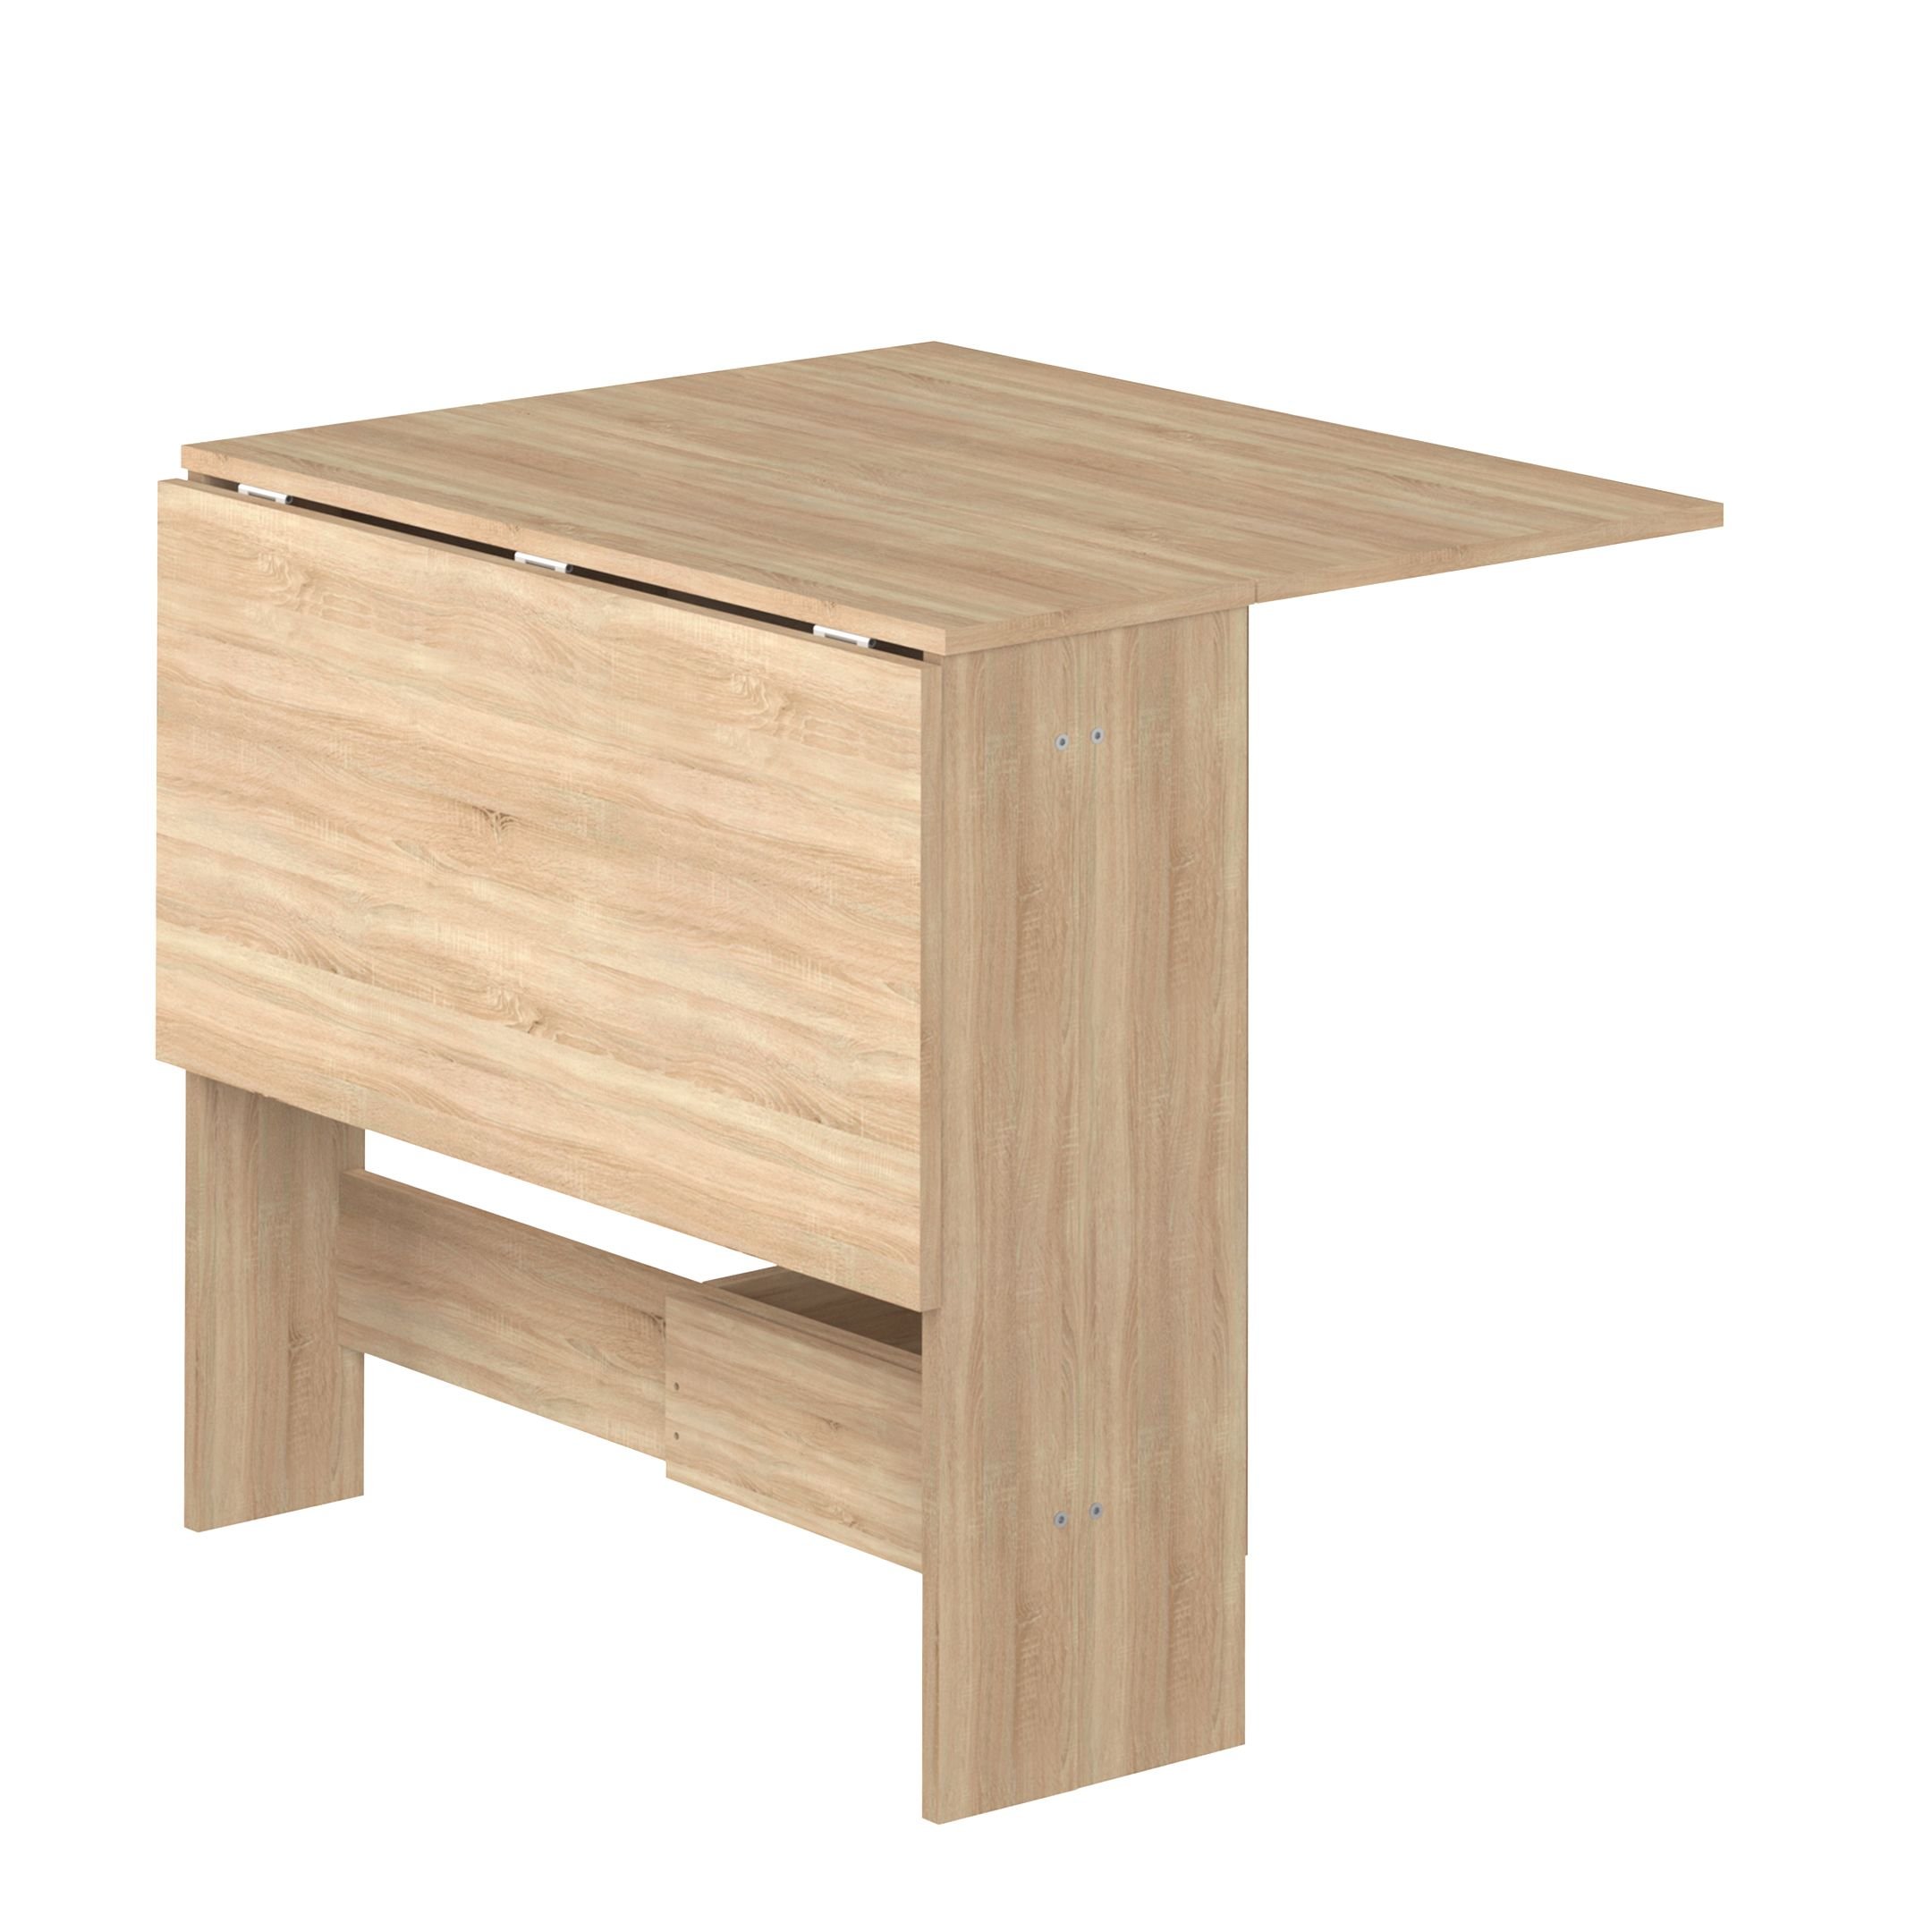 Papillon Foldable Table Natural Oak by Temahome